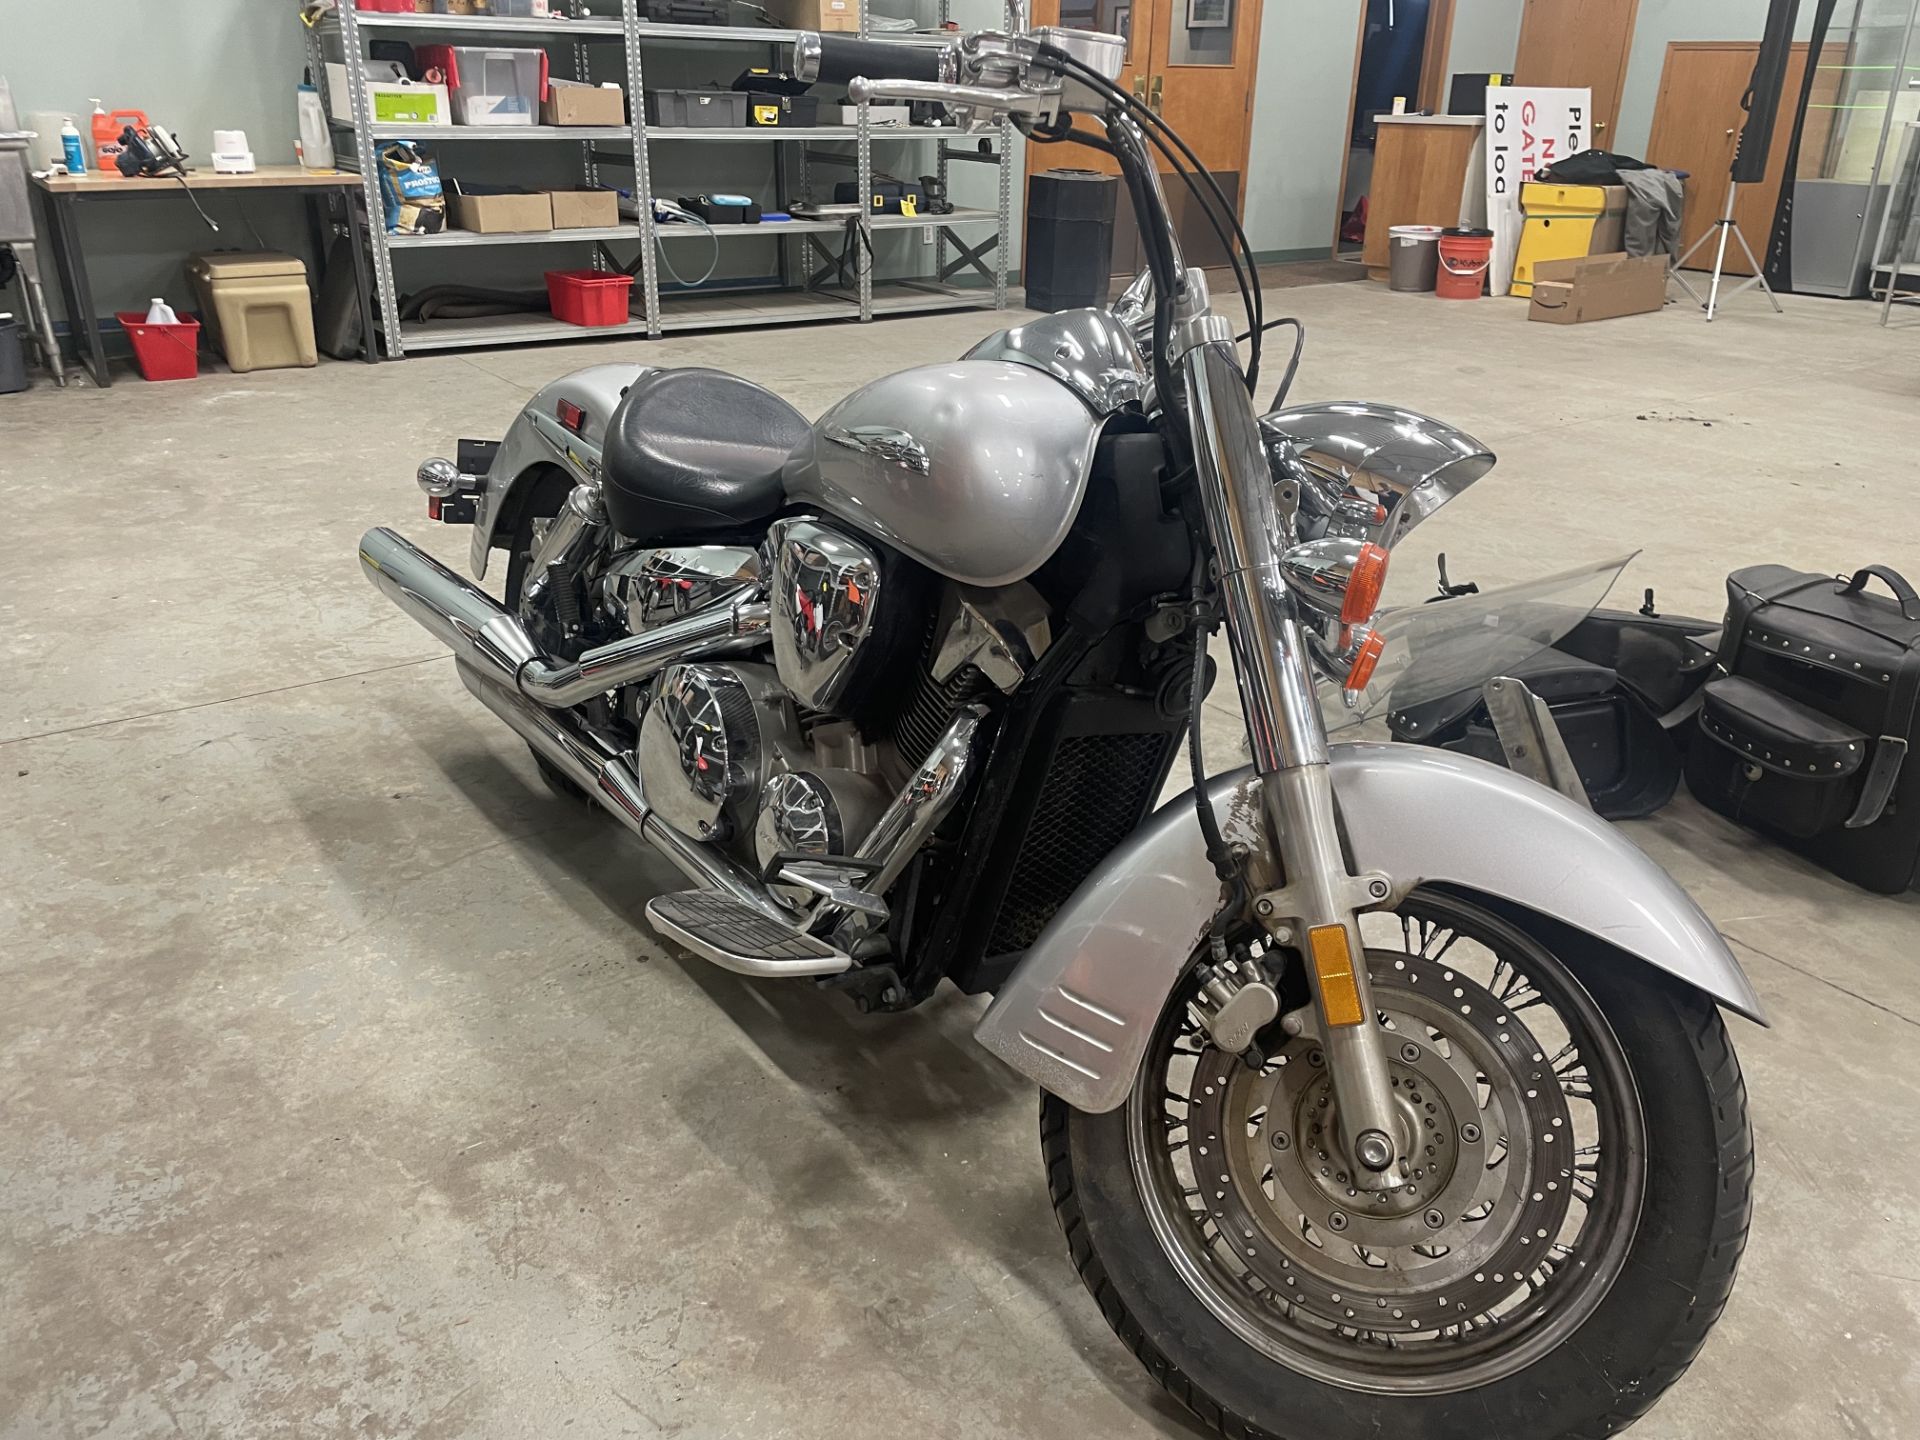 2006 HONDA VTX1300S6 MOTORCYCLE W/ WINDSHIELD INCLUDED (INSTALLATION REQUIRED) 5067 KM SHOWING